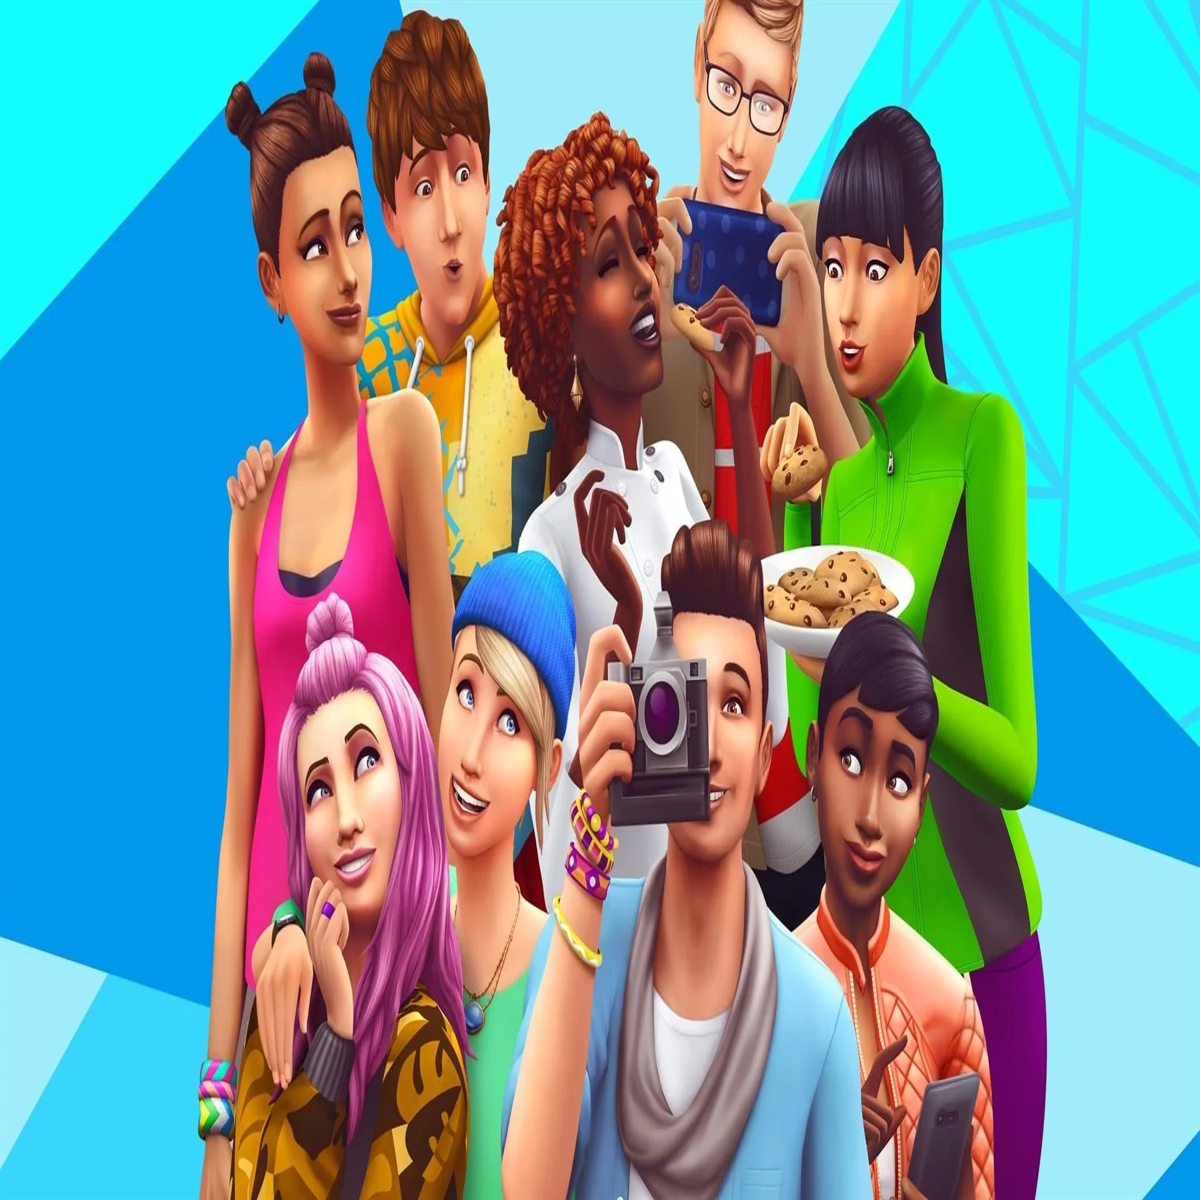 The Sims 4: Likes and Dislikes, What's new in the latest base game update